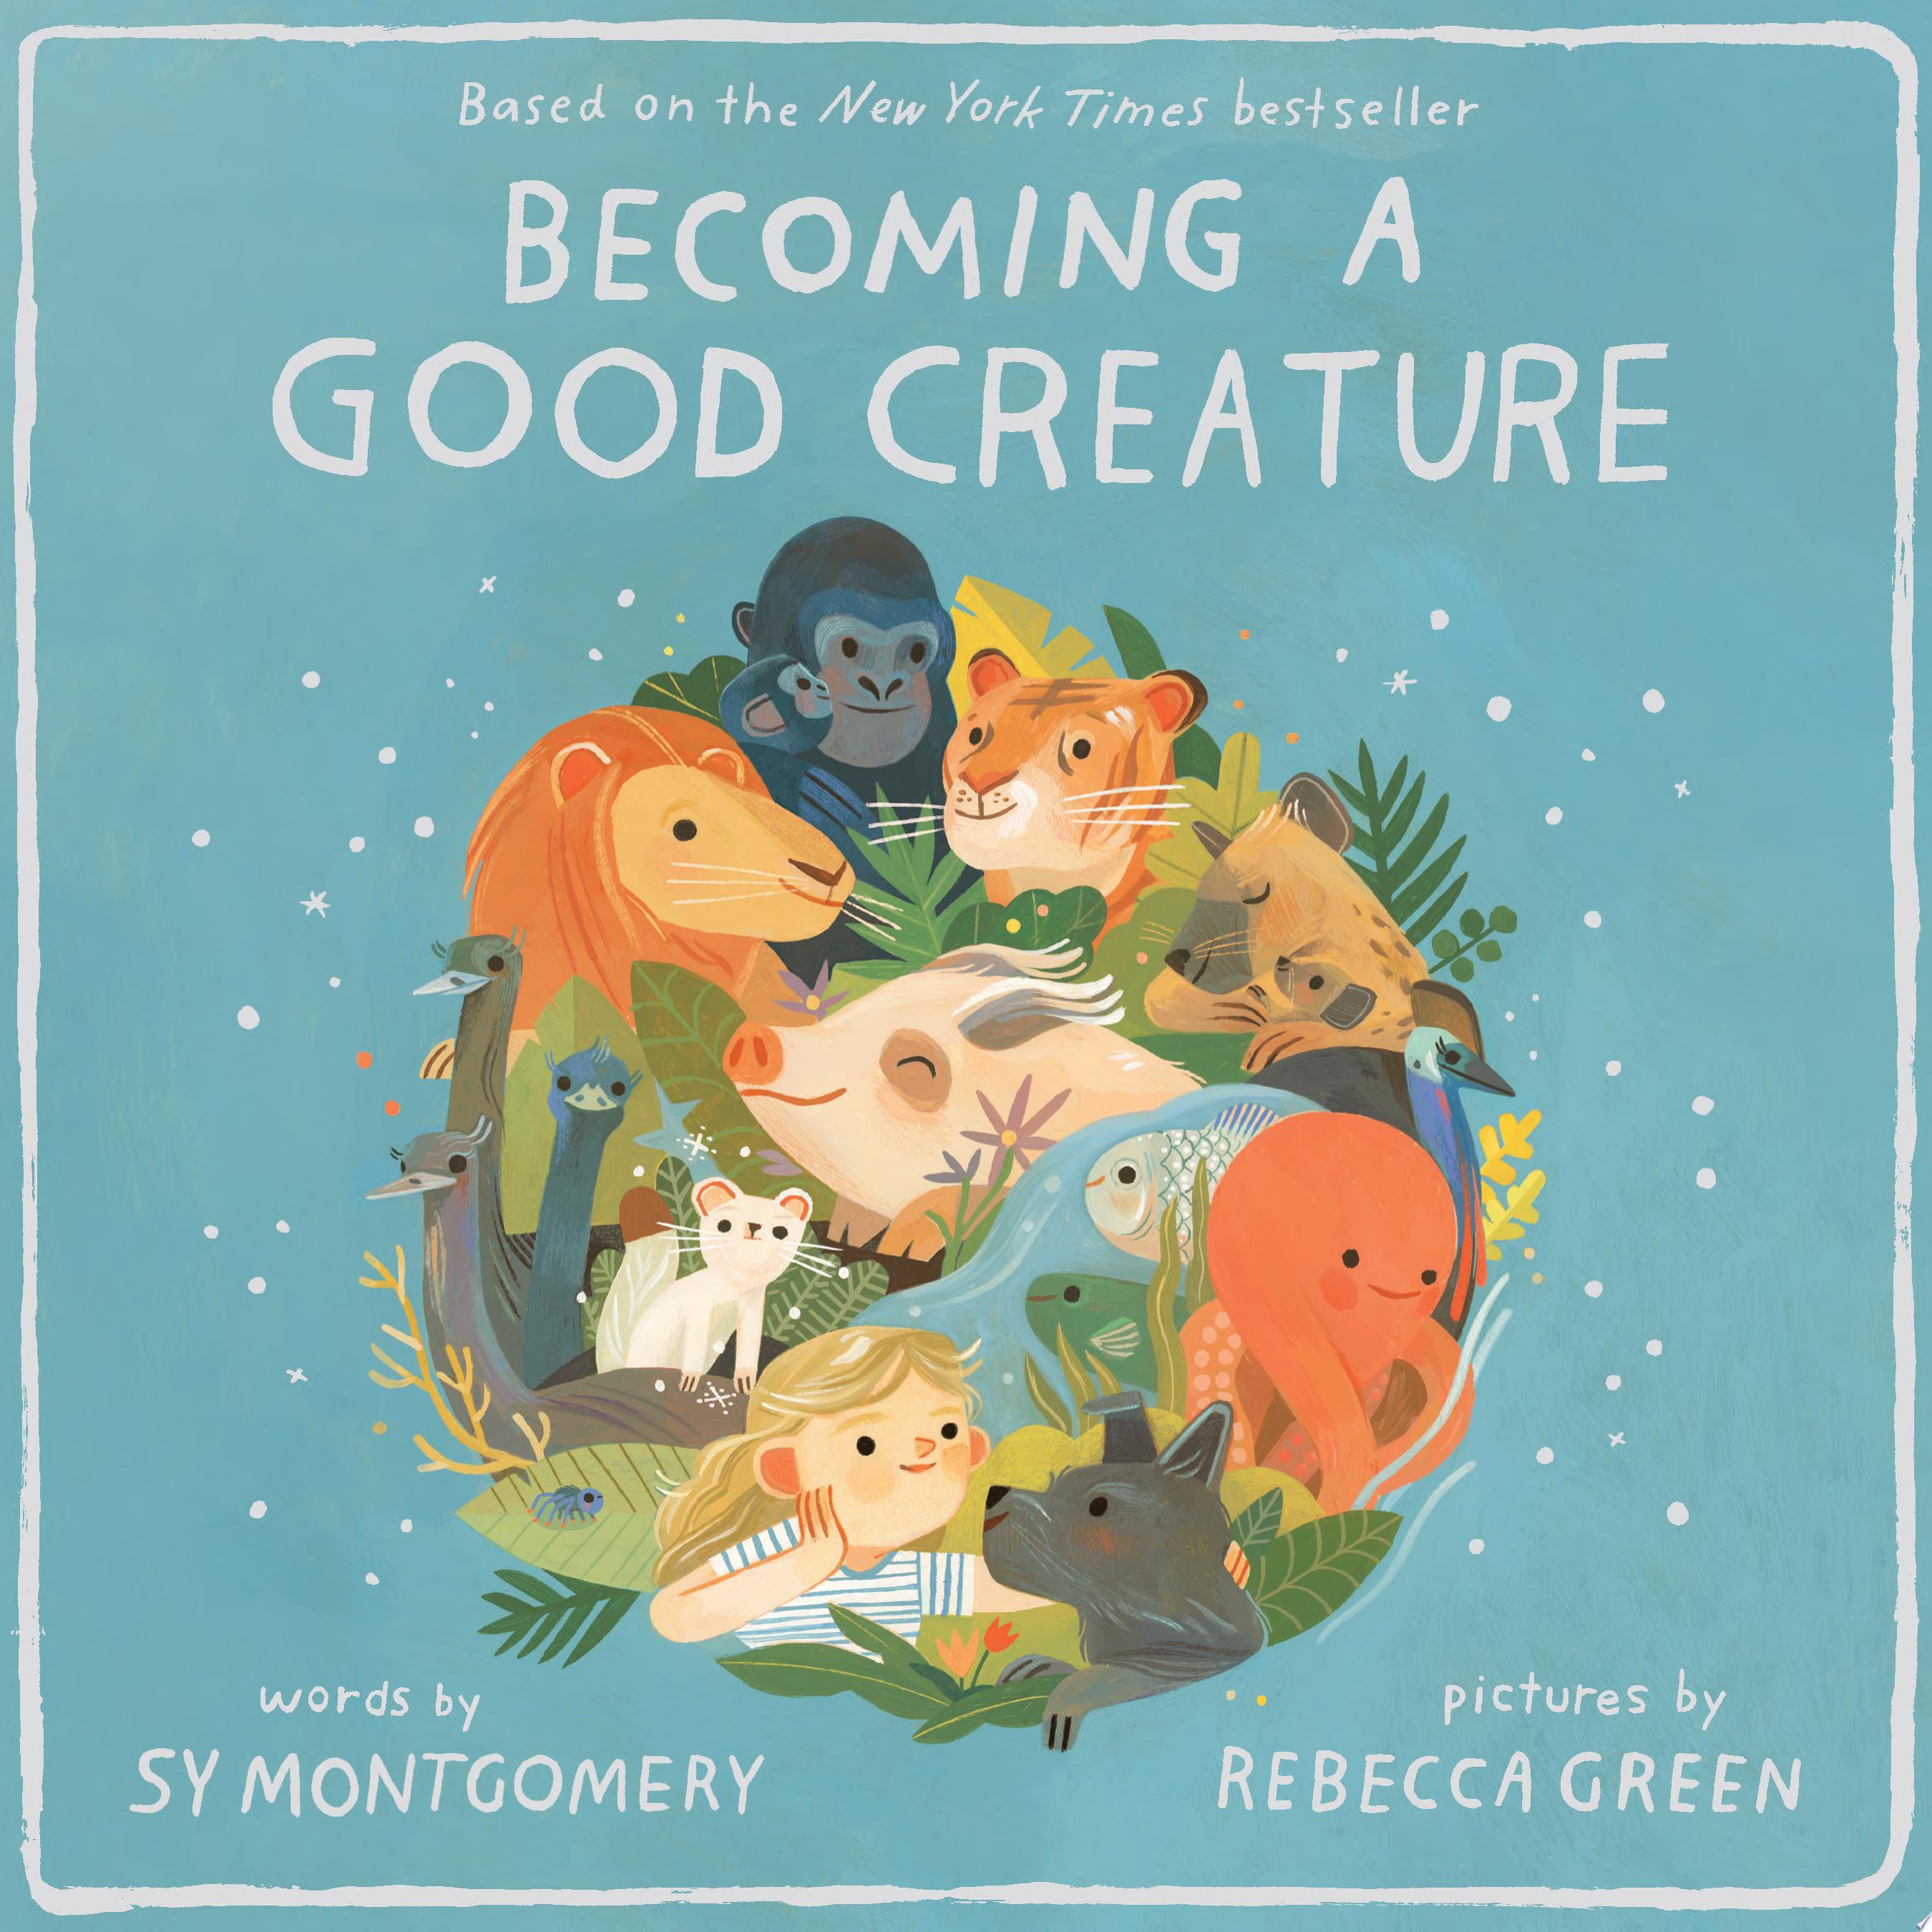 Image for "Becoming a Good Creature"